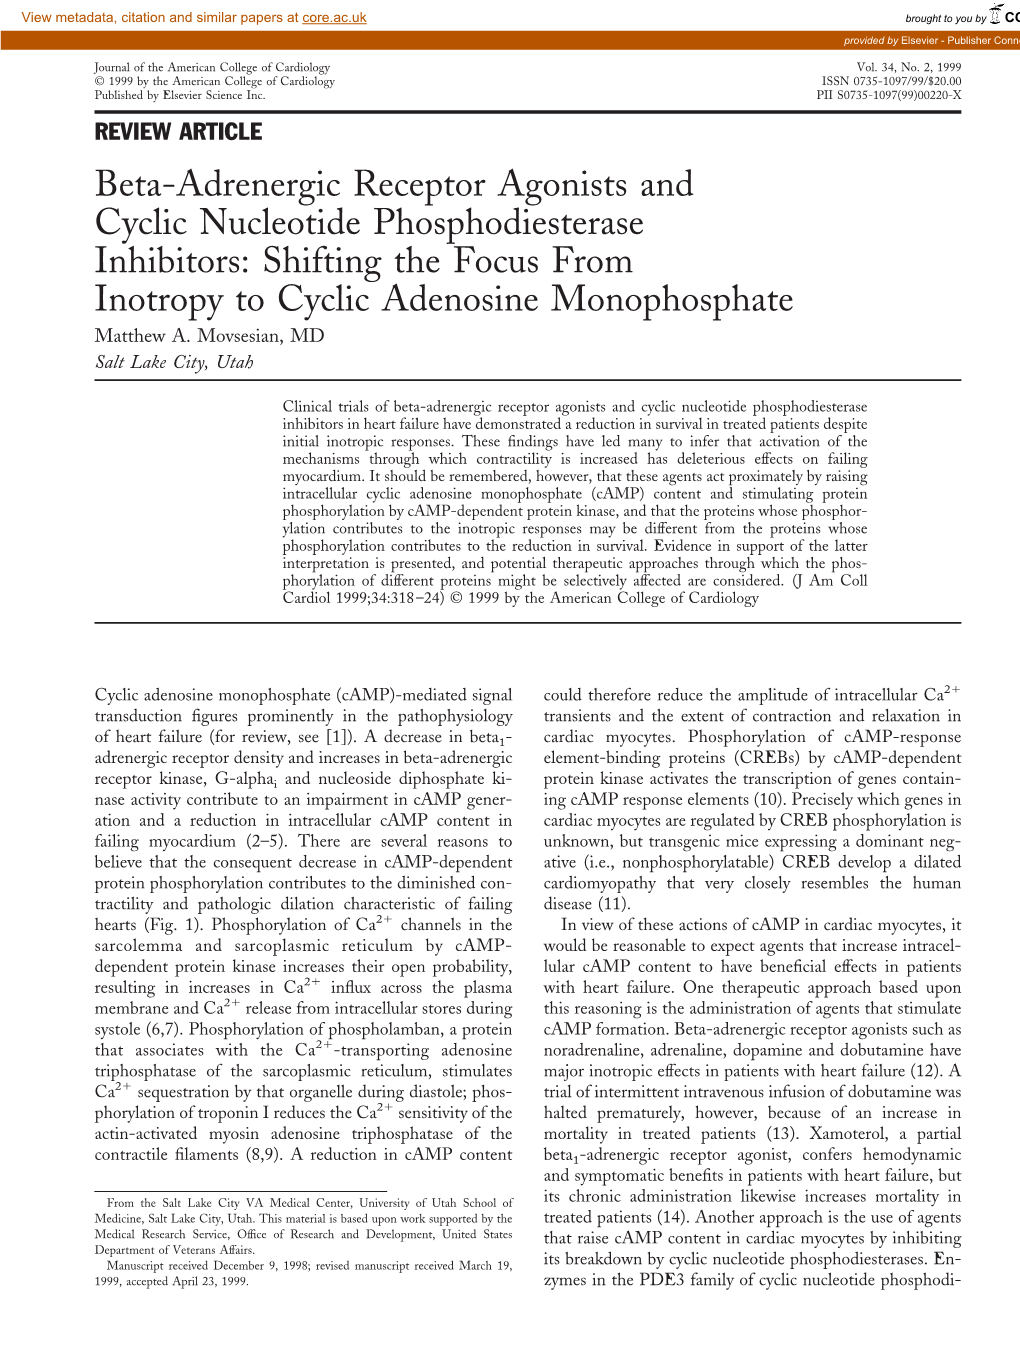 Beta-Adrenergic Receptor Agonists and Cyclic Nucleotide Phosphodiesterase Inhibitors: Shifting the Focus from Inotropy to Cyclic Adenosine Monophosphate Matthew A